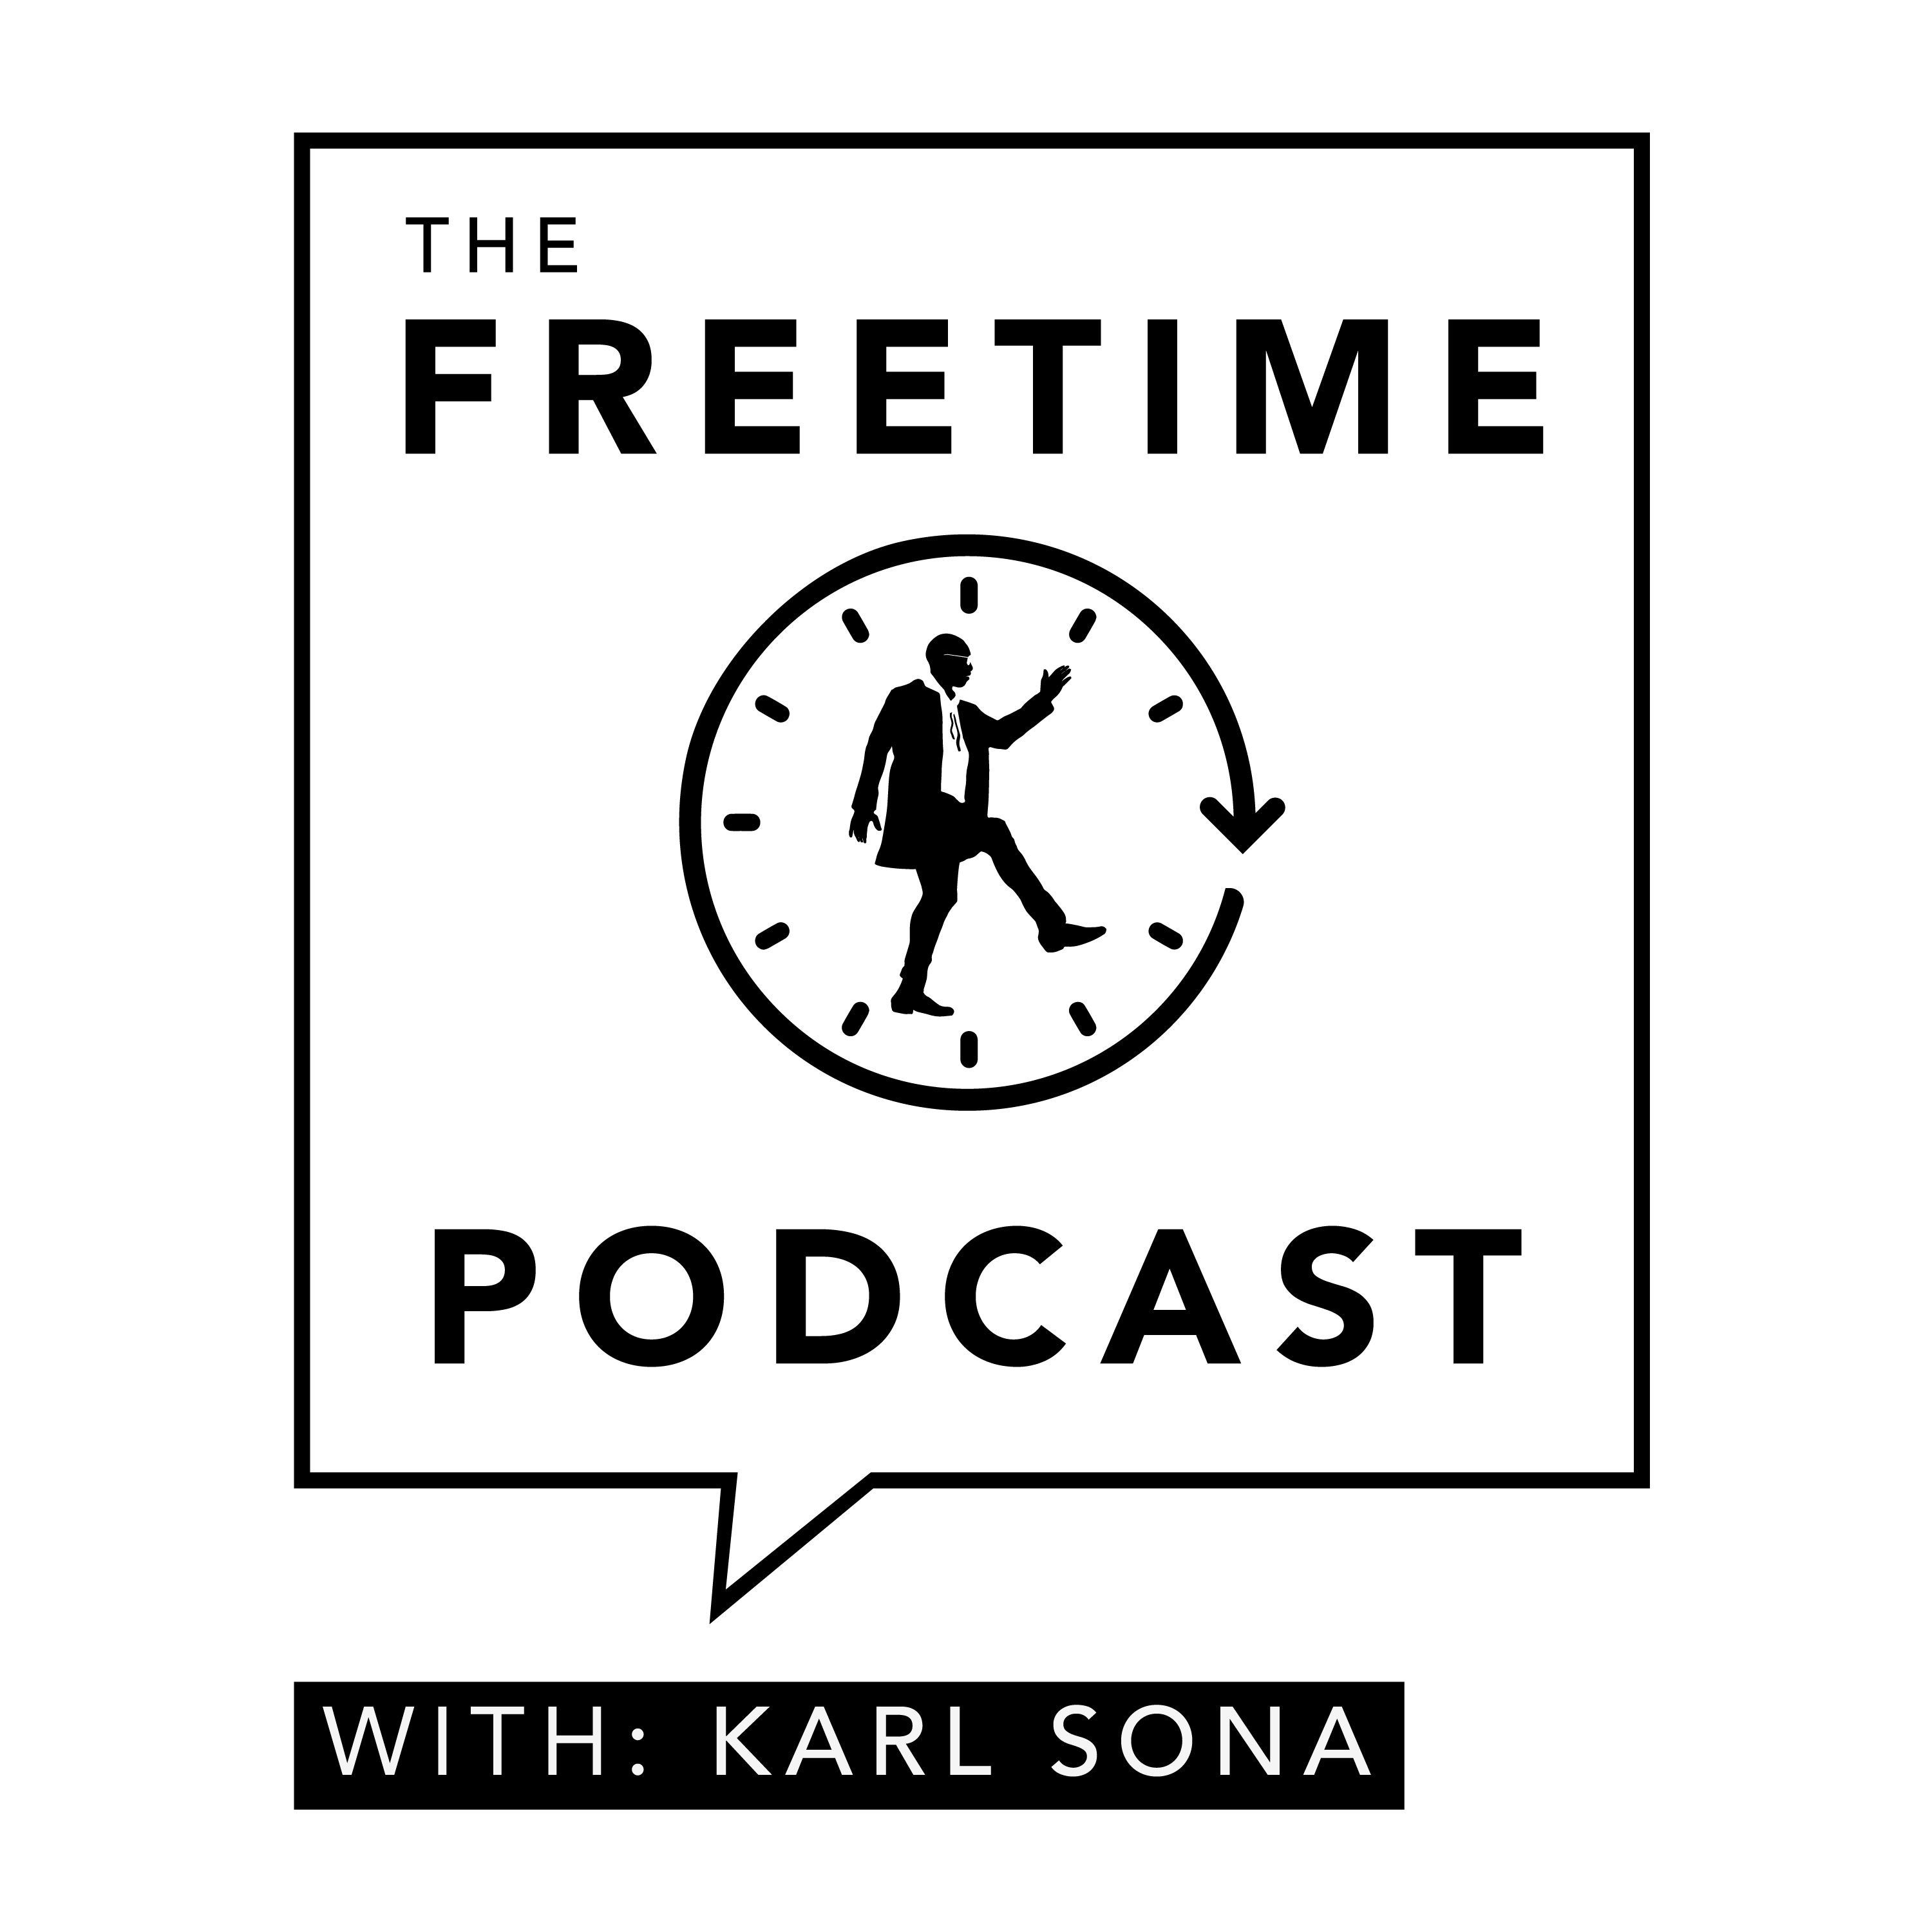 Artwork for podcast The Free Time Podcast